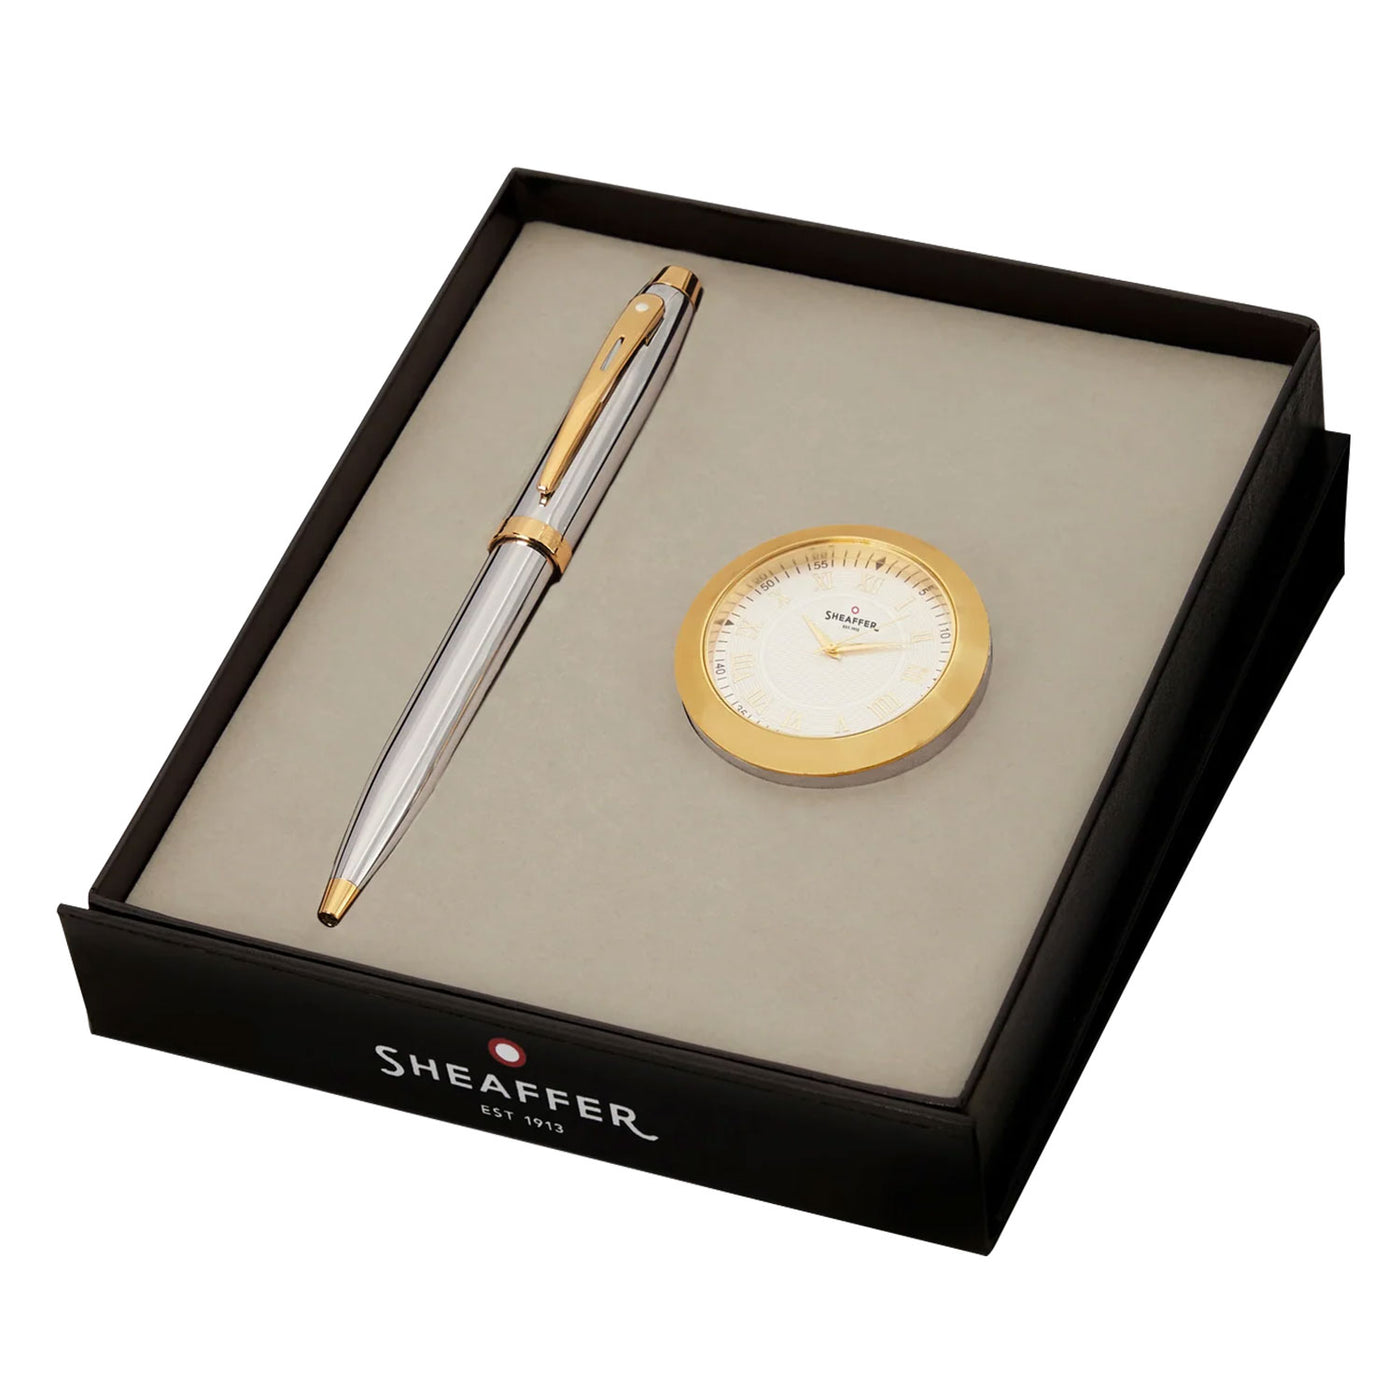 Sheaffer Gift Set - 100 Series Bright Chrome GT Ball Pen with Table Clock